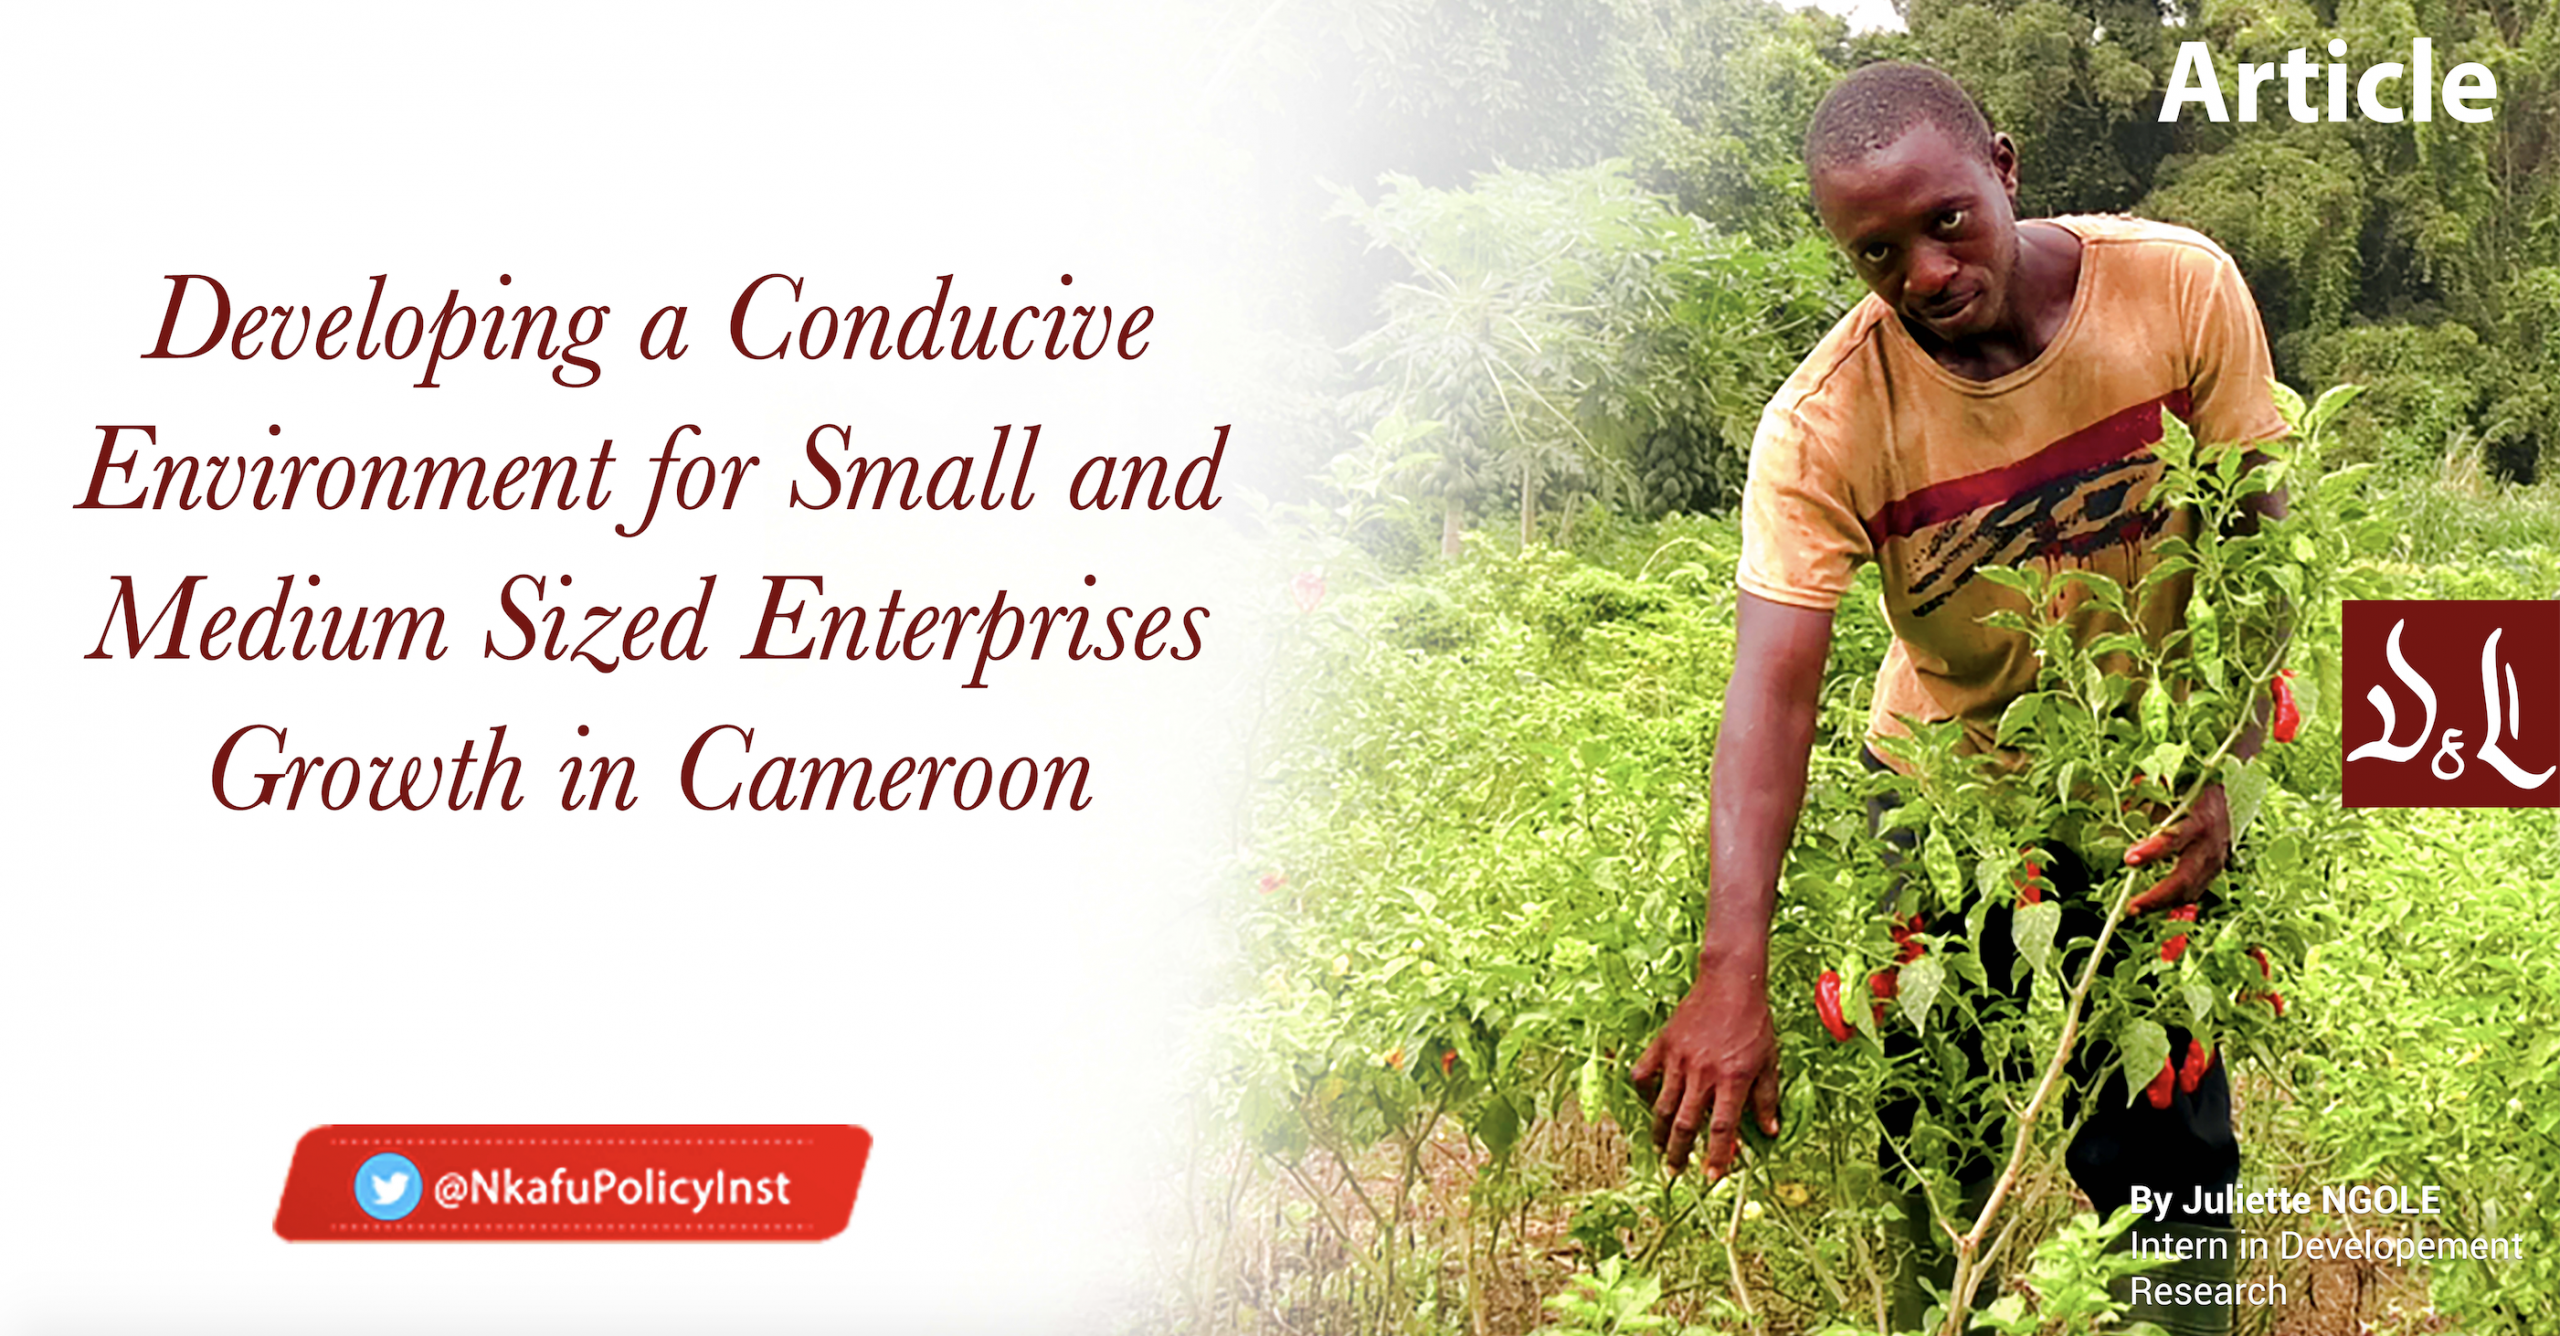 Developing a Conducive Environment for Small and Medium Sized Enterprise Growth in Cameroon